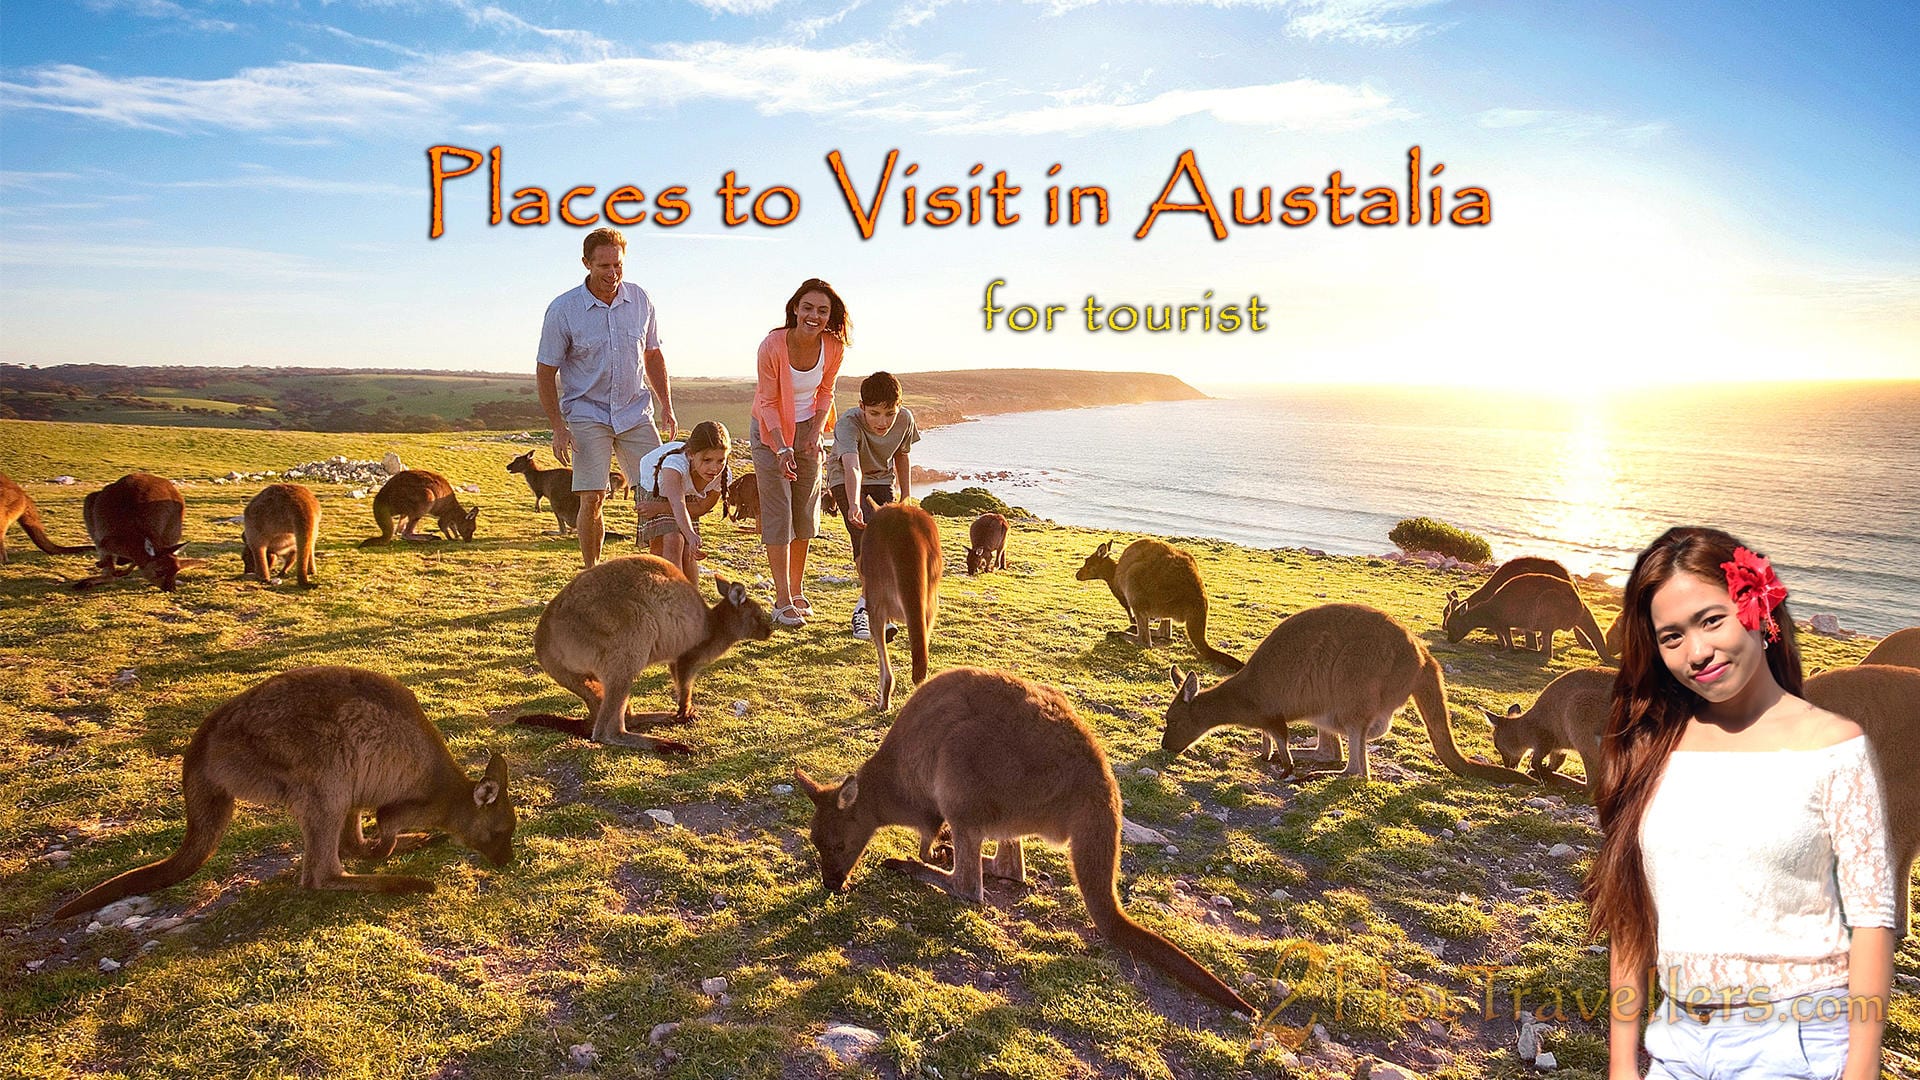 Places to Visit in Australia for tourist